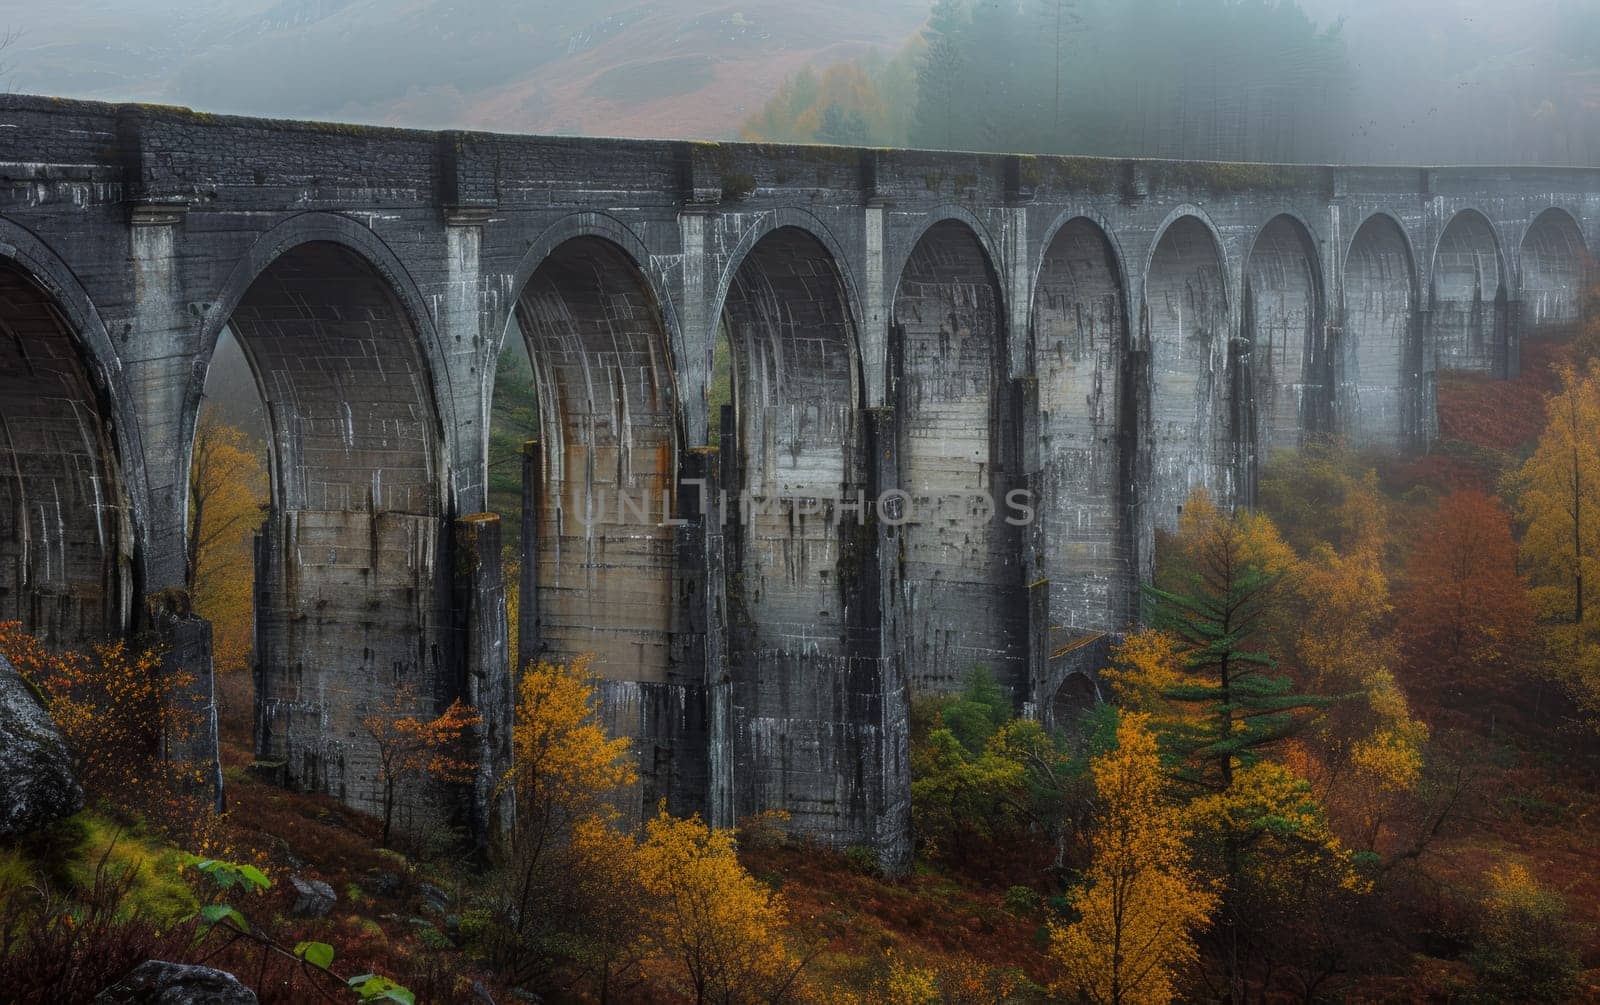 Majestic Viaduct enveloped in mist, surrounded by the lush autumnal hues of the highlands